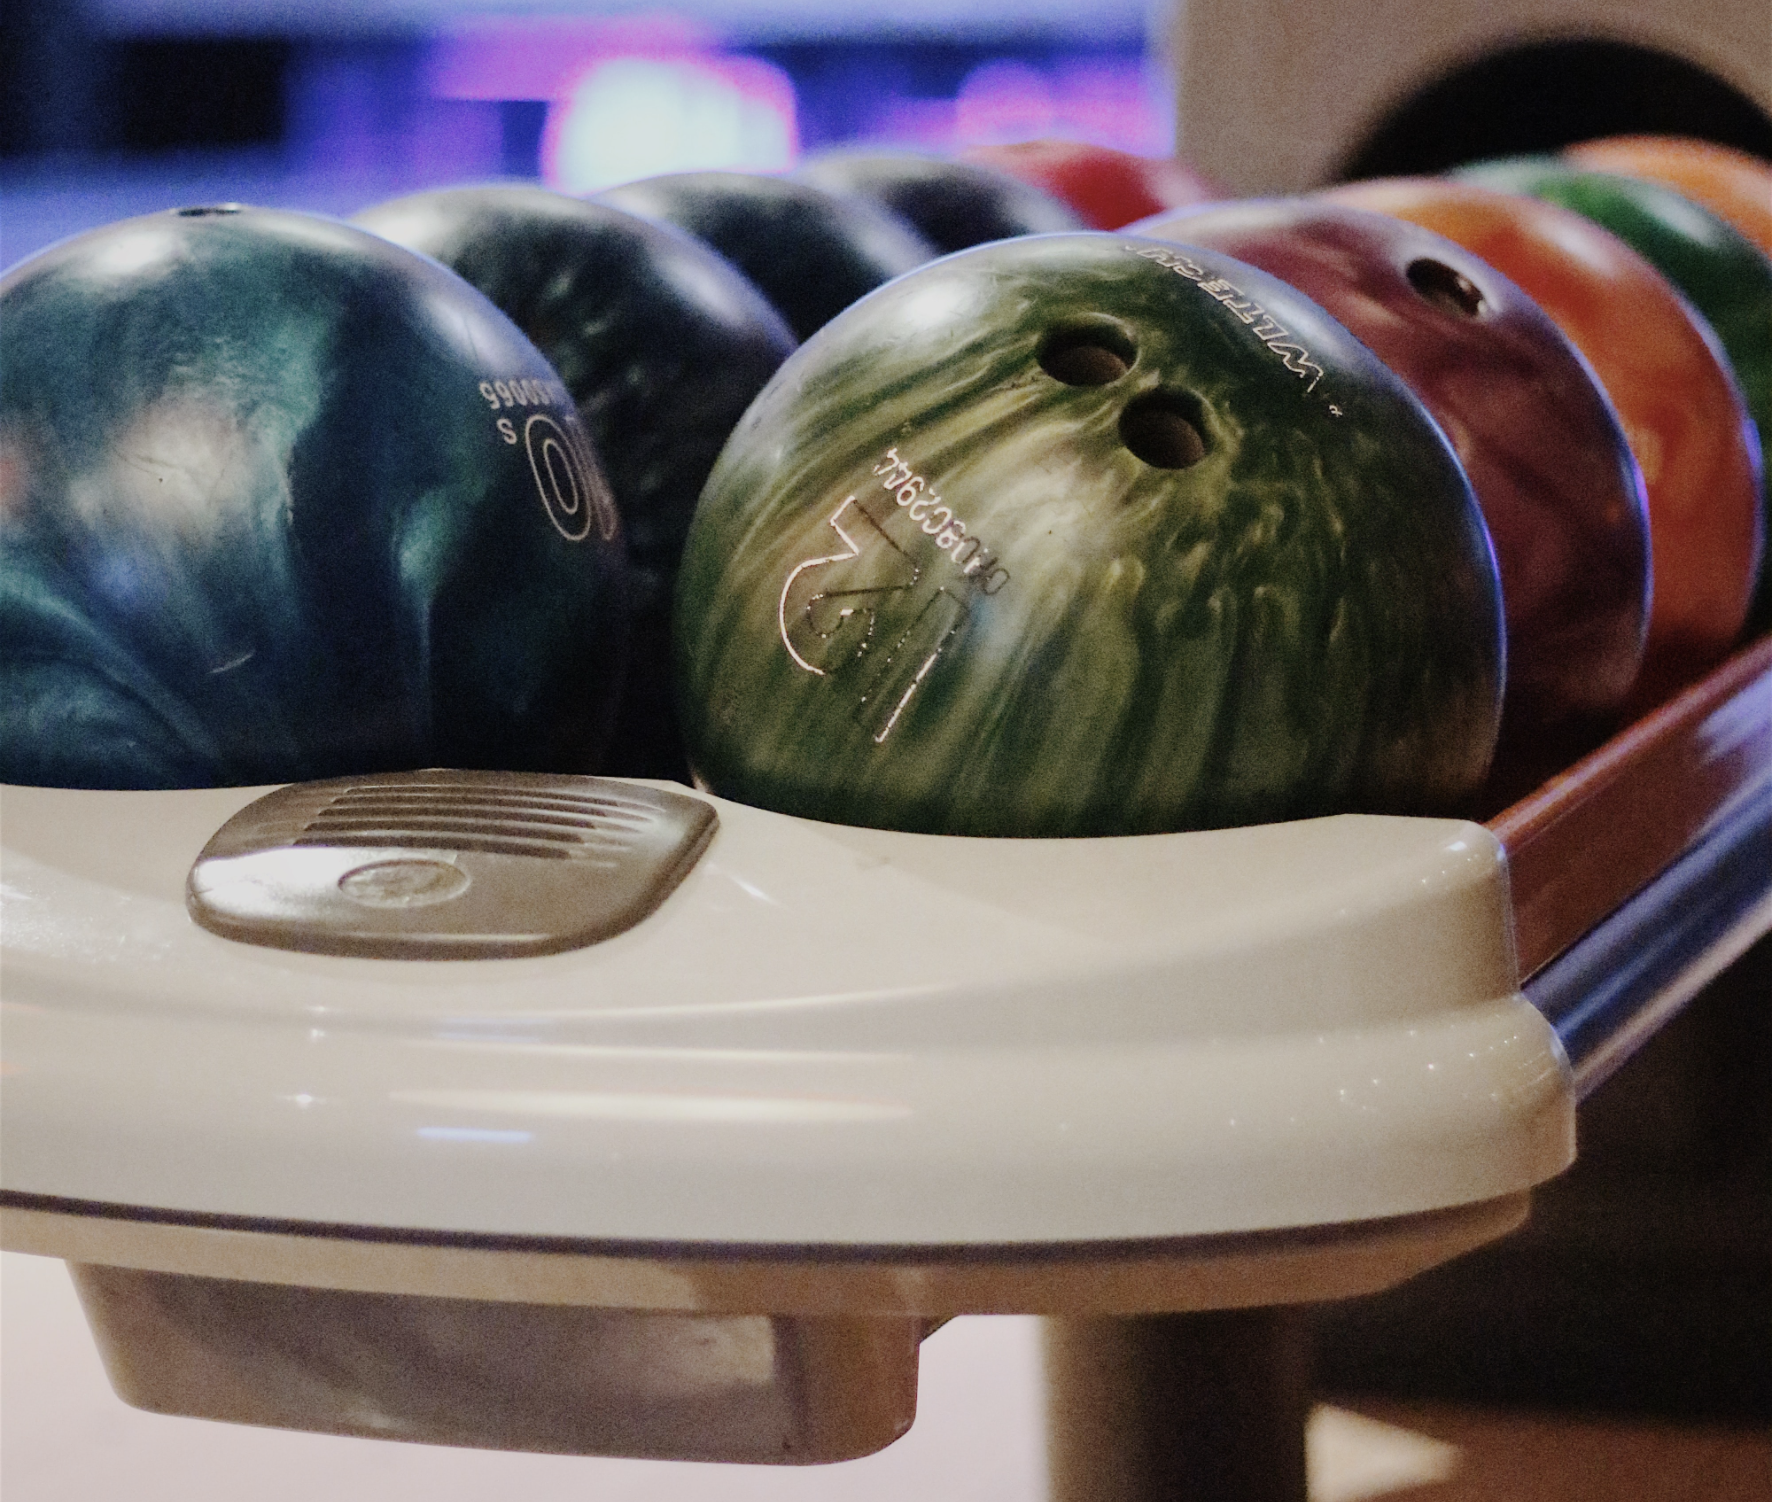 Bowling is just one of many free(ish) events for students to enjoy this Friday.